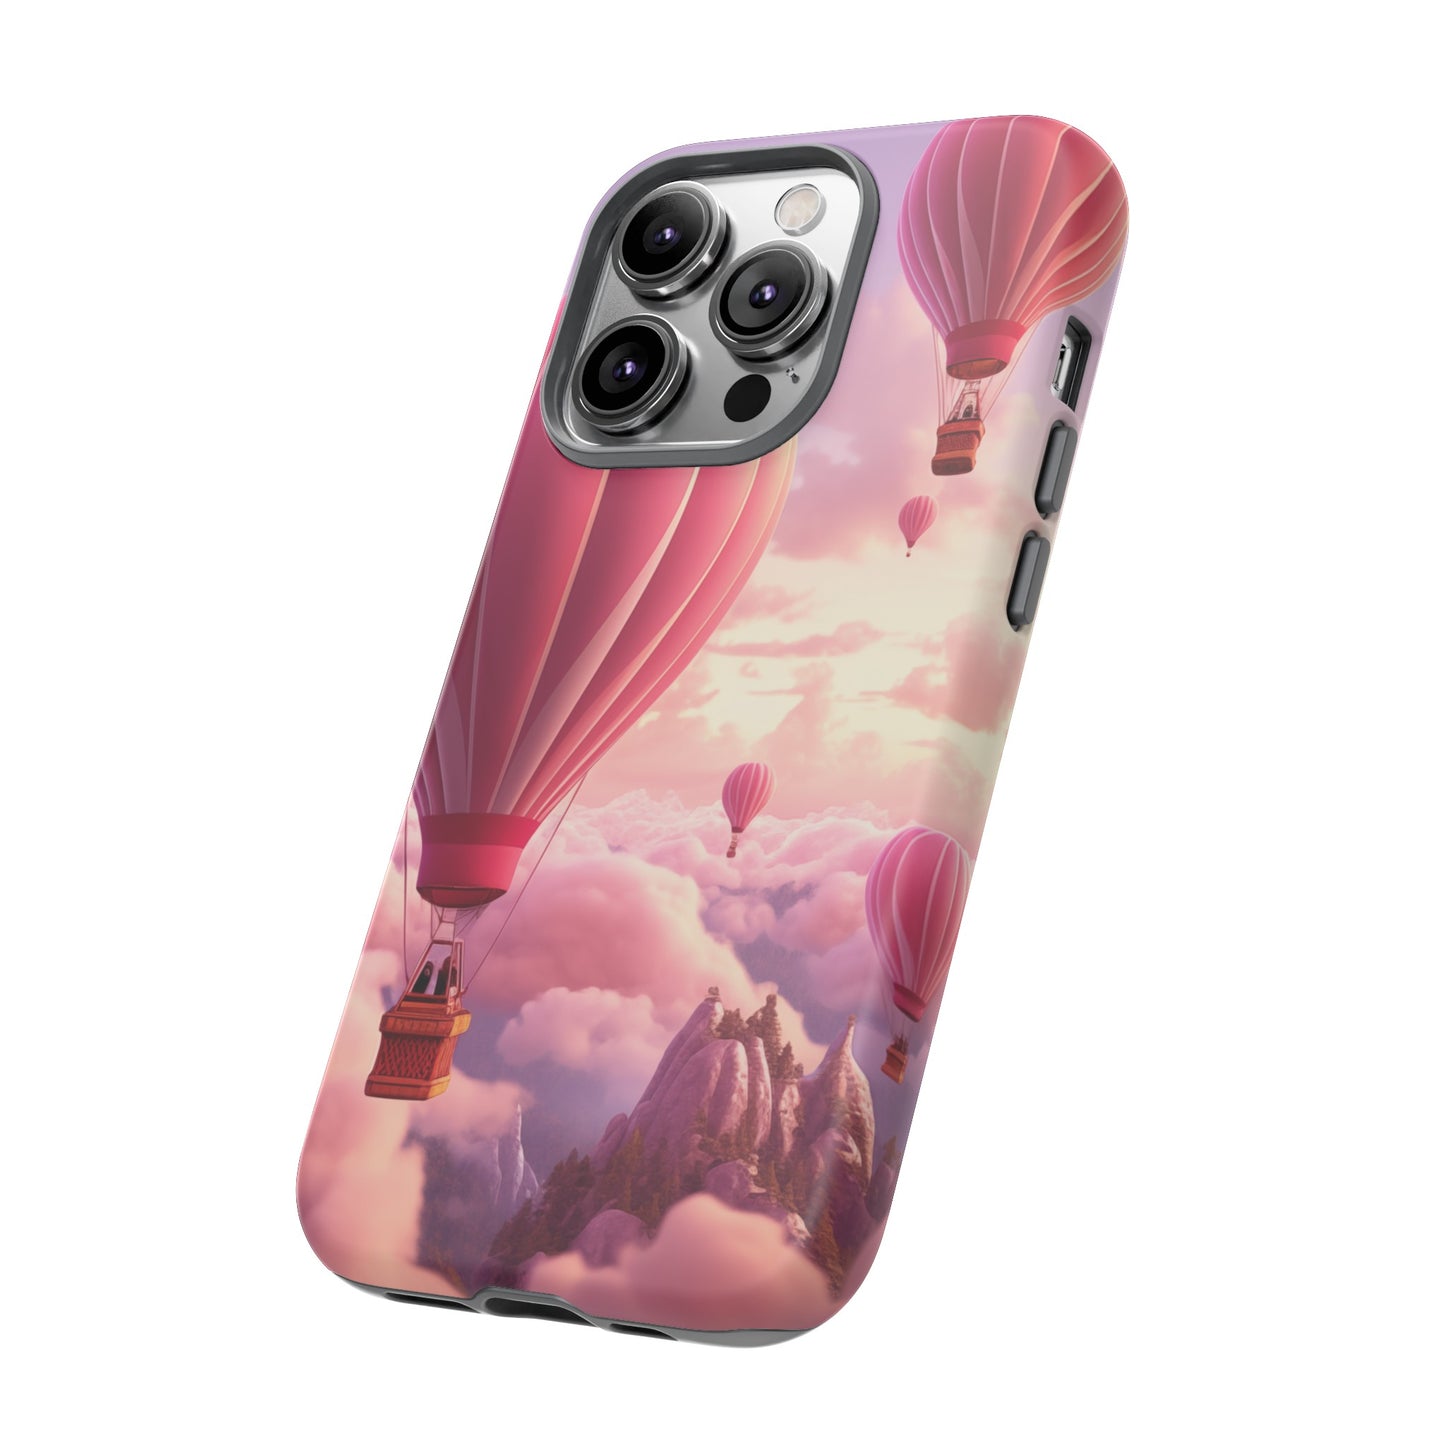 WhisperPrint - Romantic Hot Air Ballons in the Morning Sky Style Phone Case  - Tough Cases for iPhone 15, iPhone 14 and iPhone 13